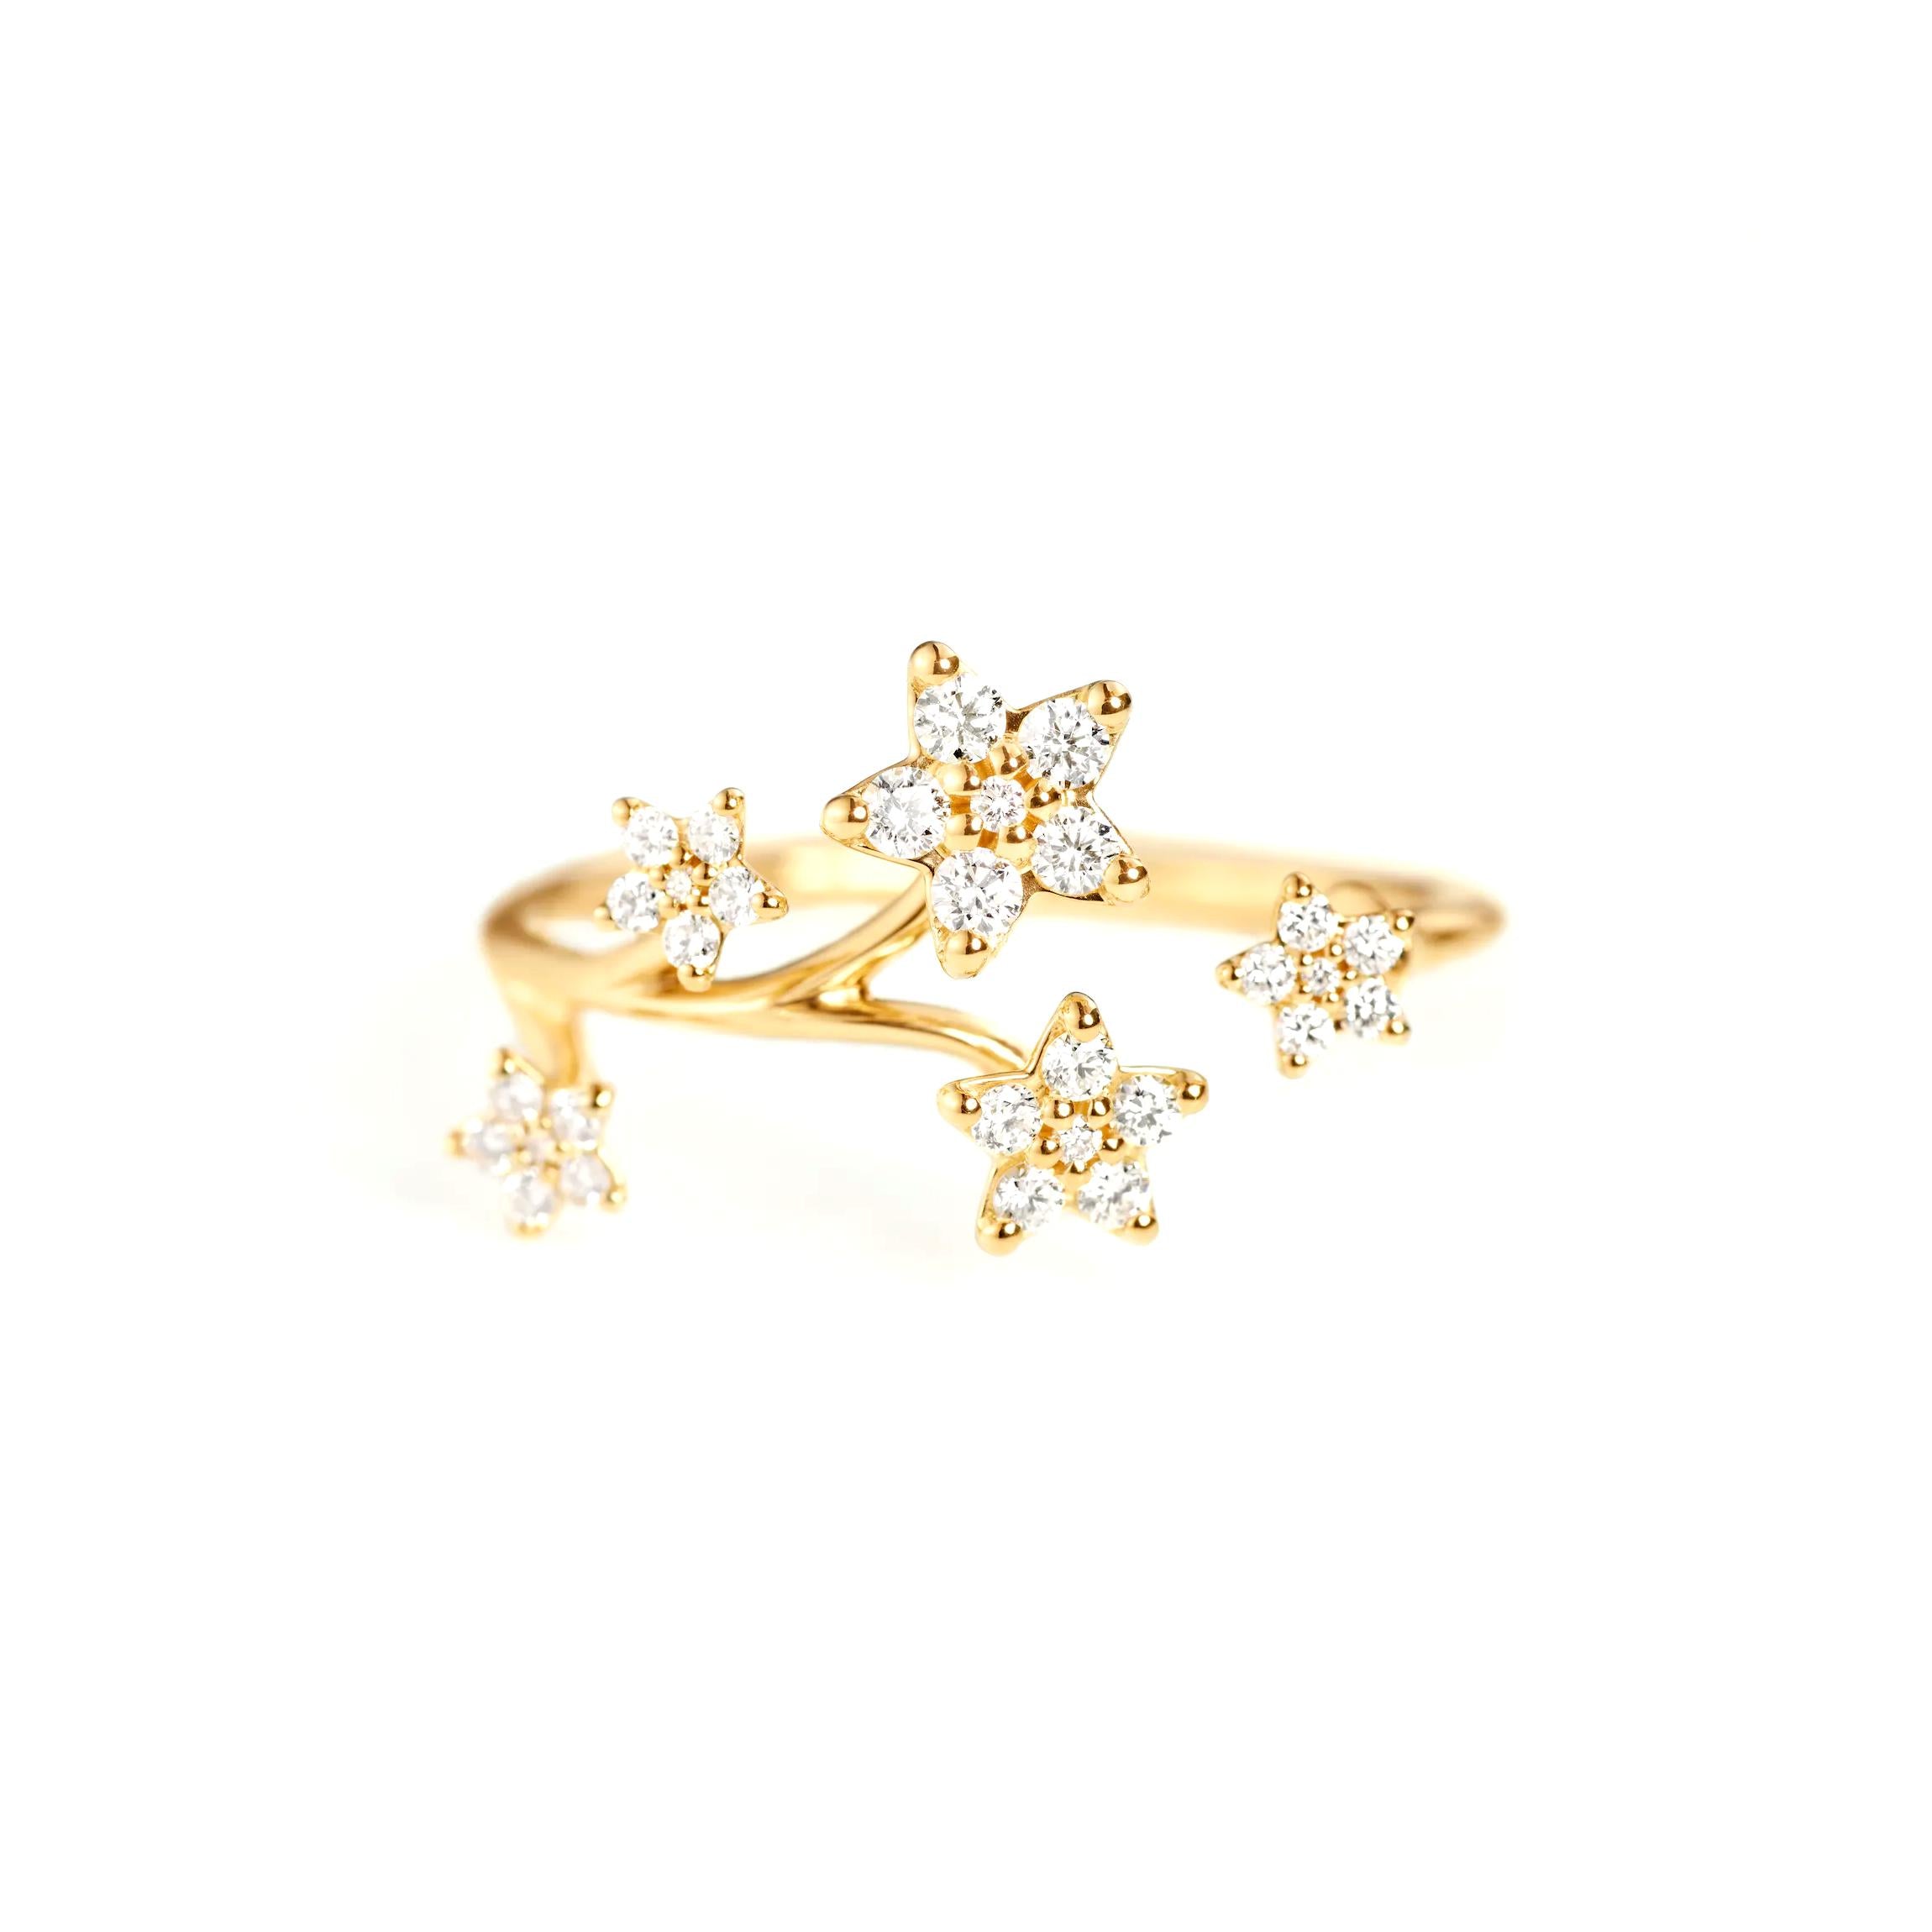 Ole Lynggaard Shooting Stars Ring, Gelbgold, A2864-401